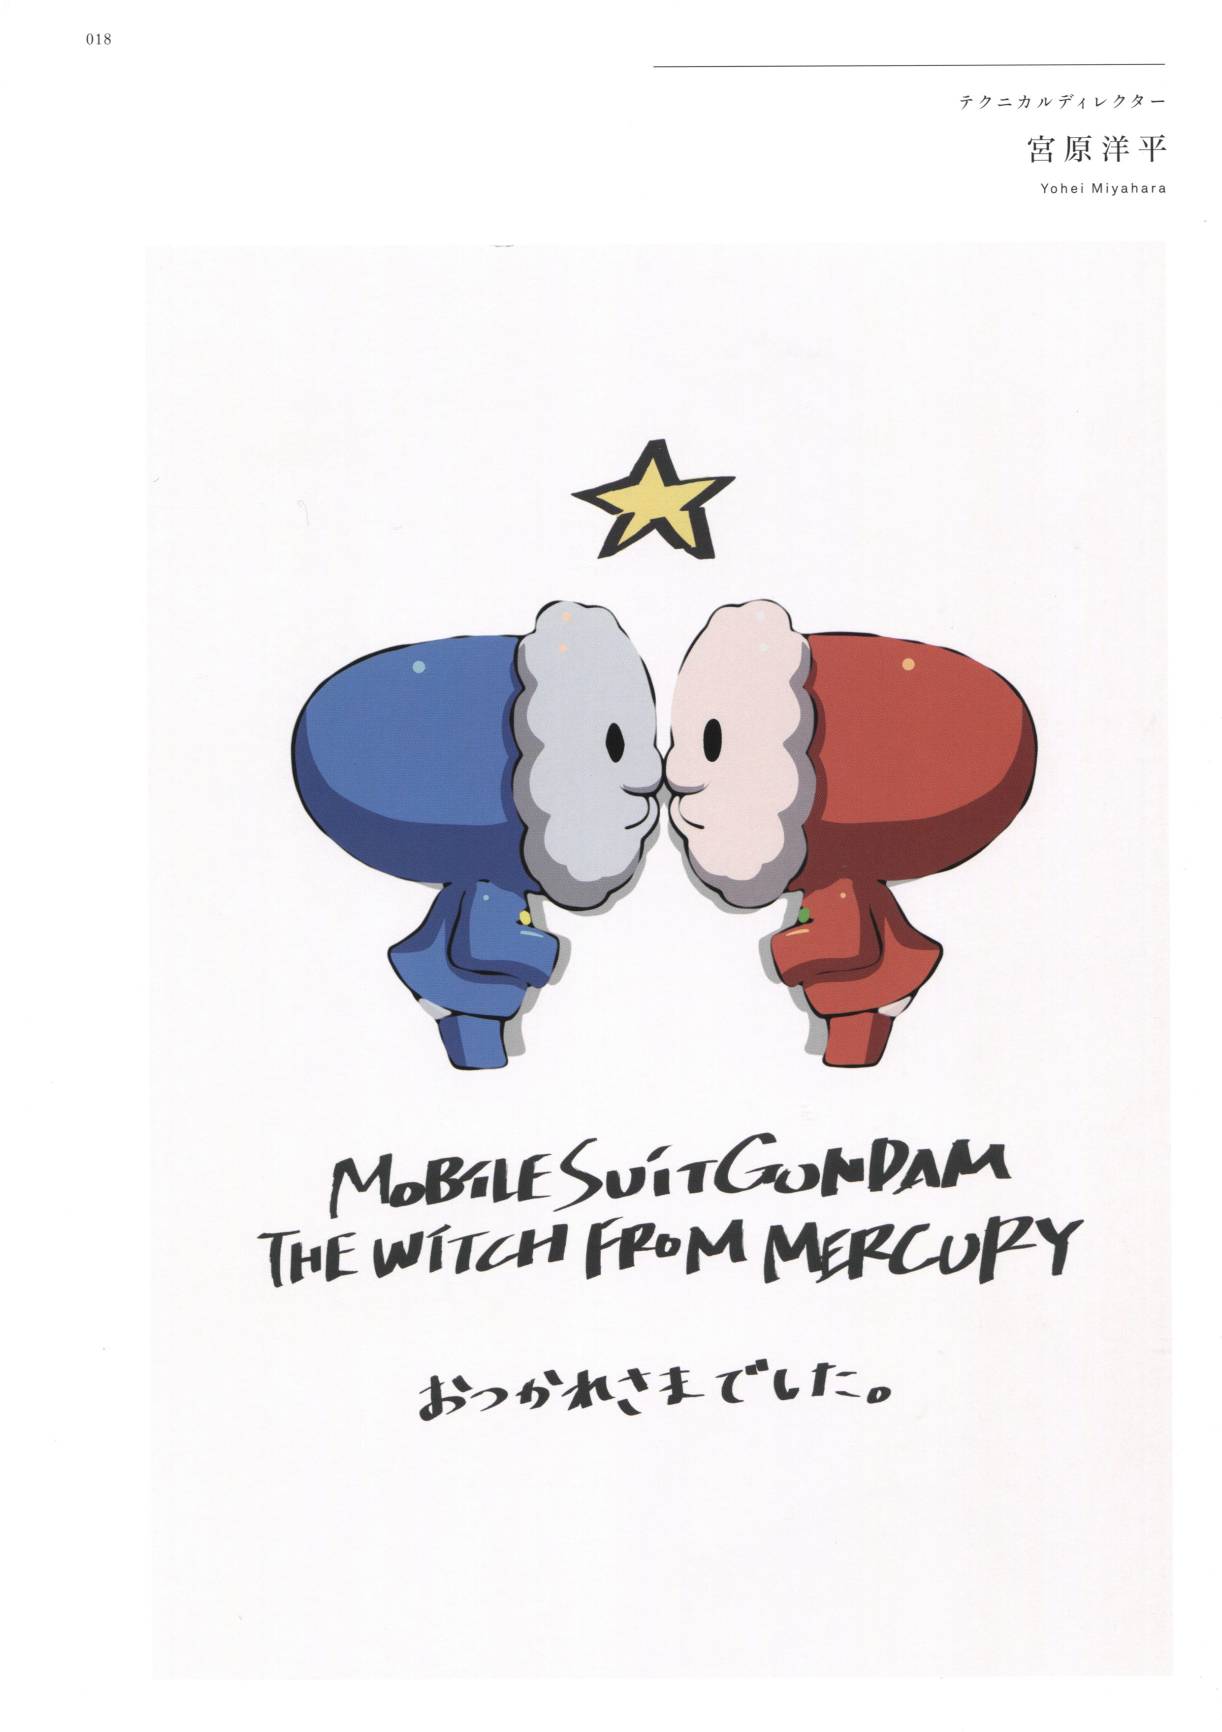 MOBILE SUIT GUNDAM THE WITCH FROM MERCURY COMMEMORATIVE BOOK - 全一卷(1/4) - 2